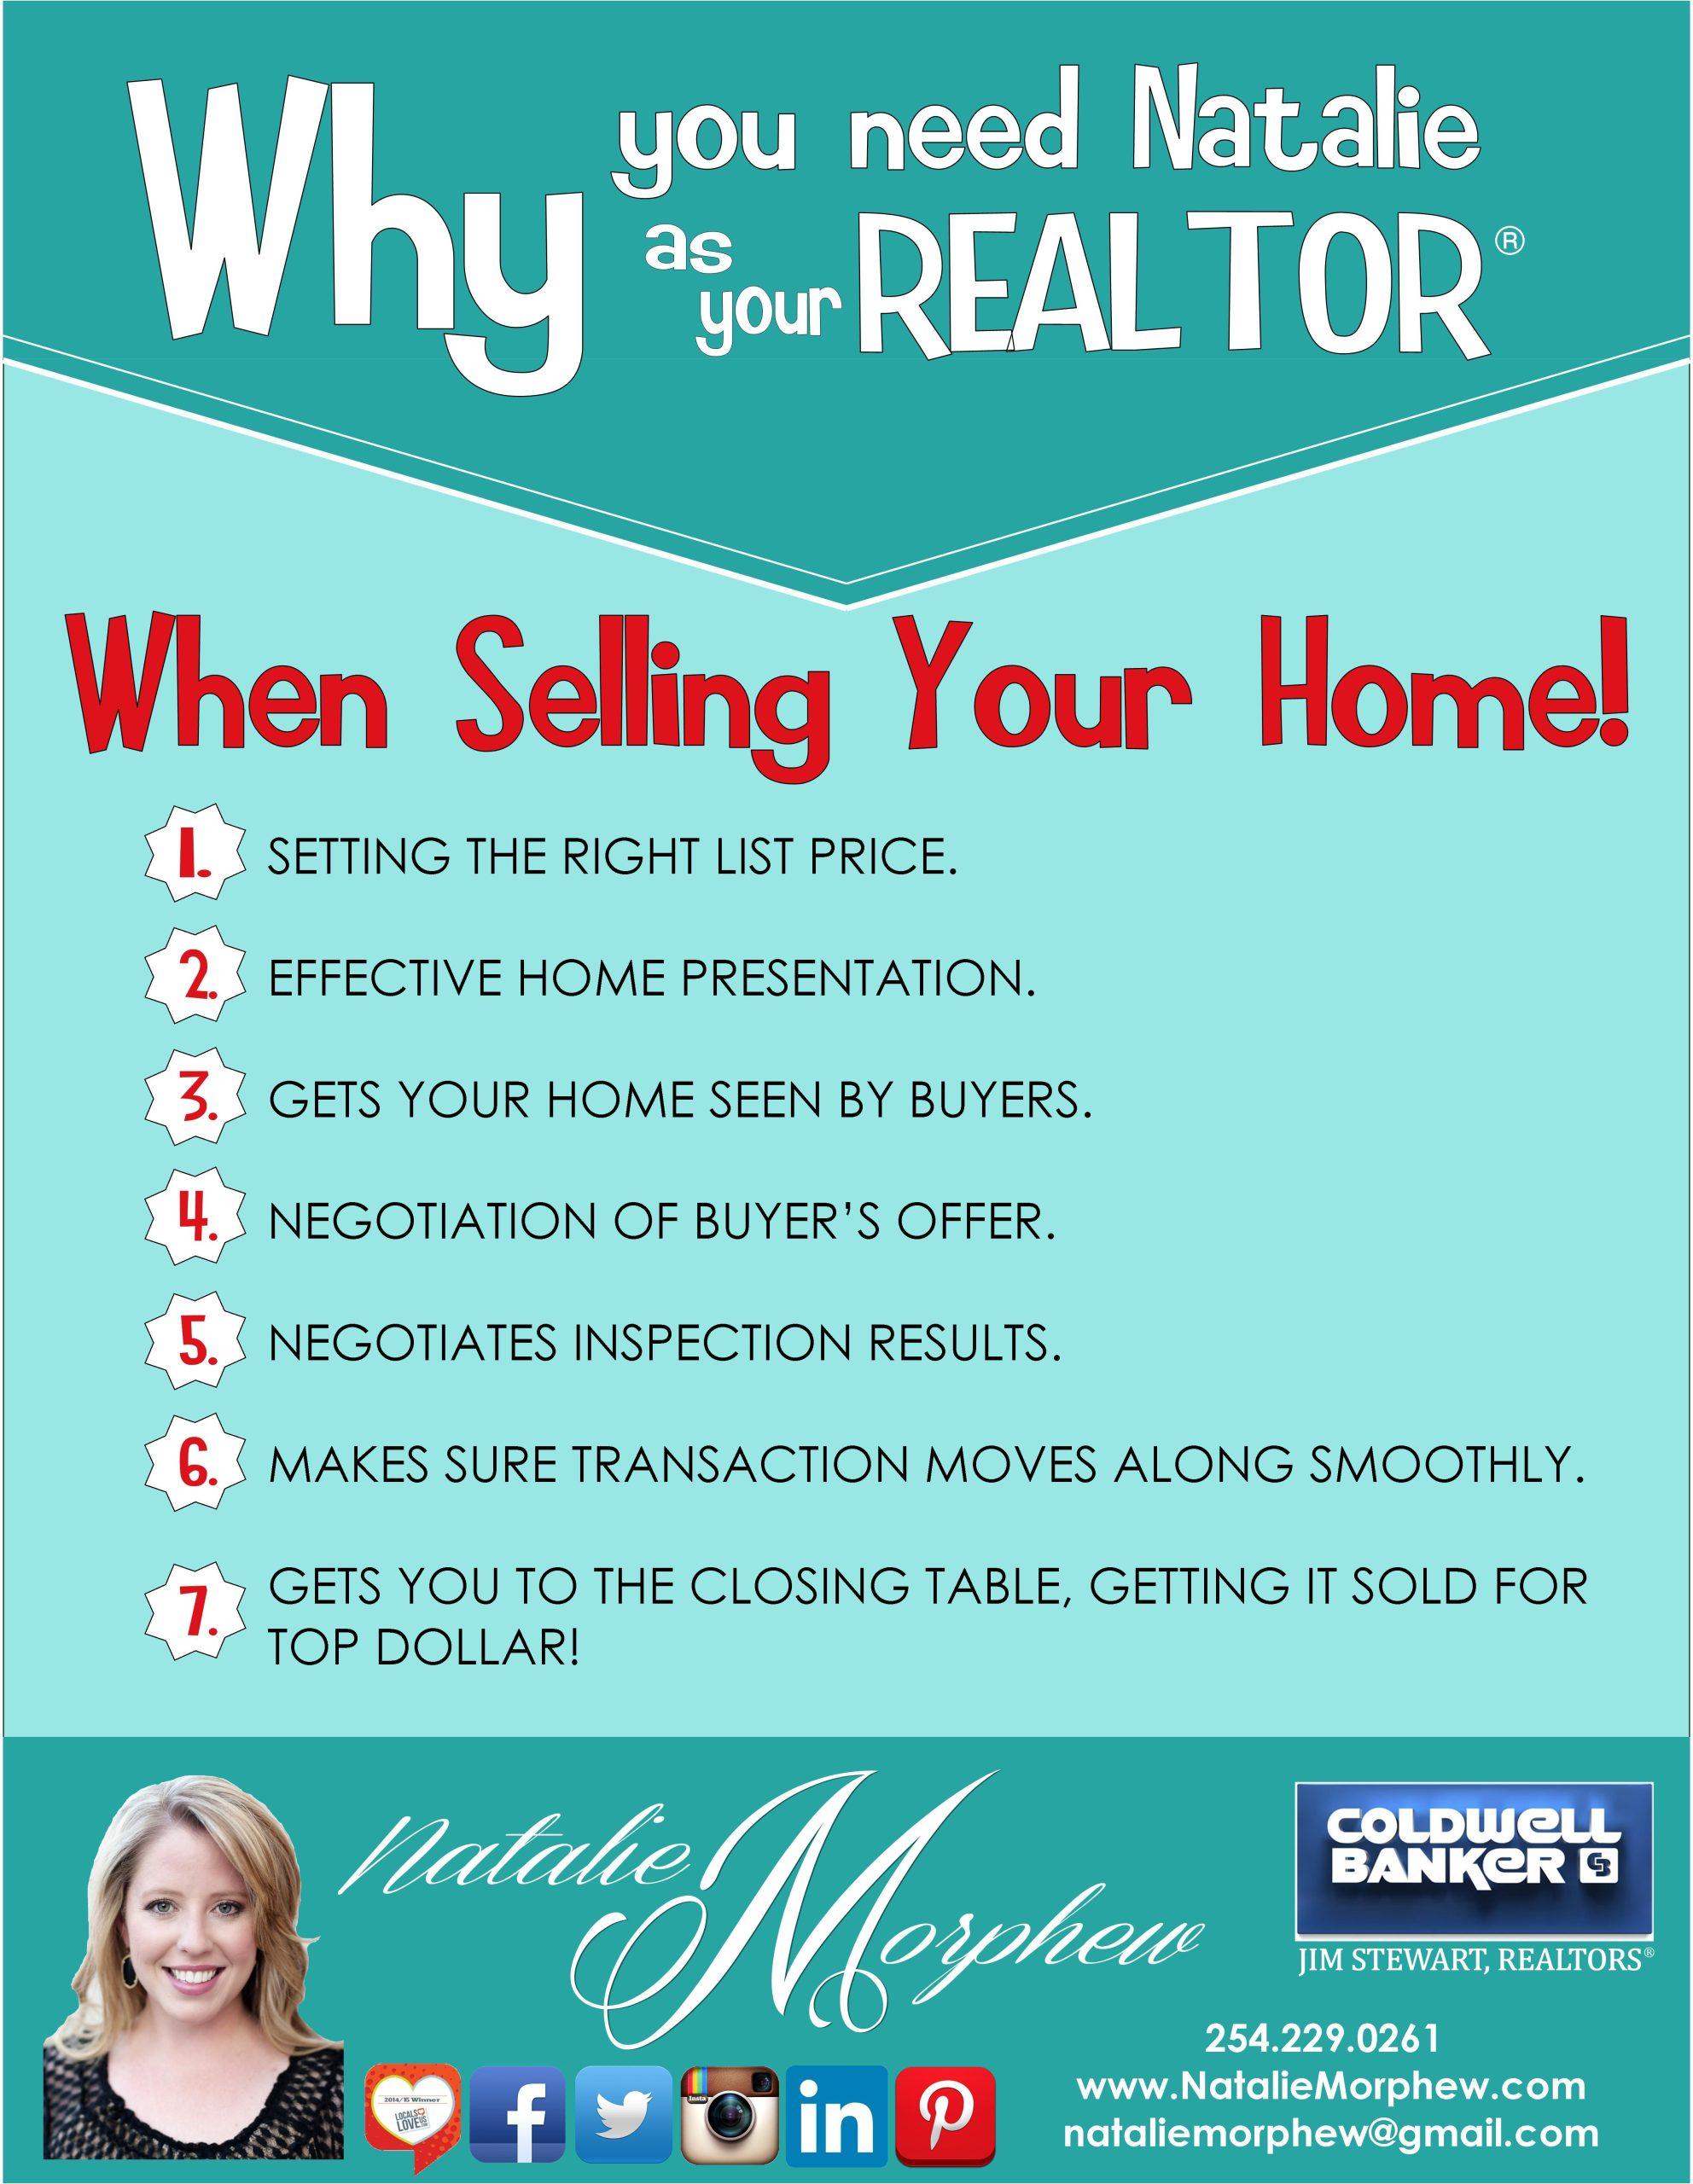 Why choose me as your real estate agent